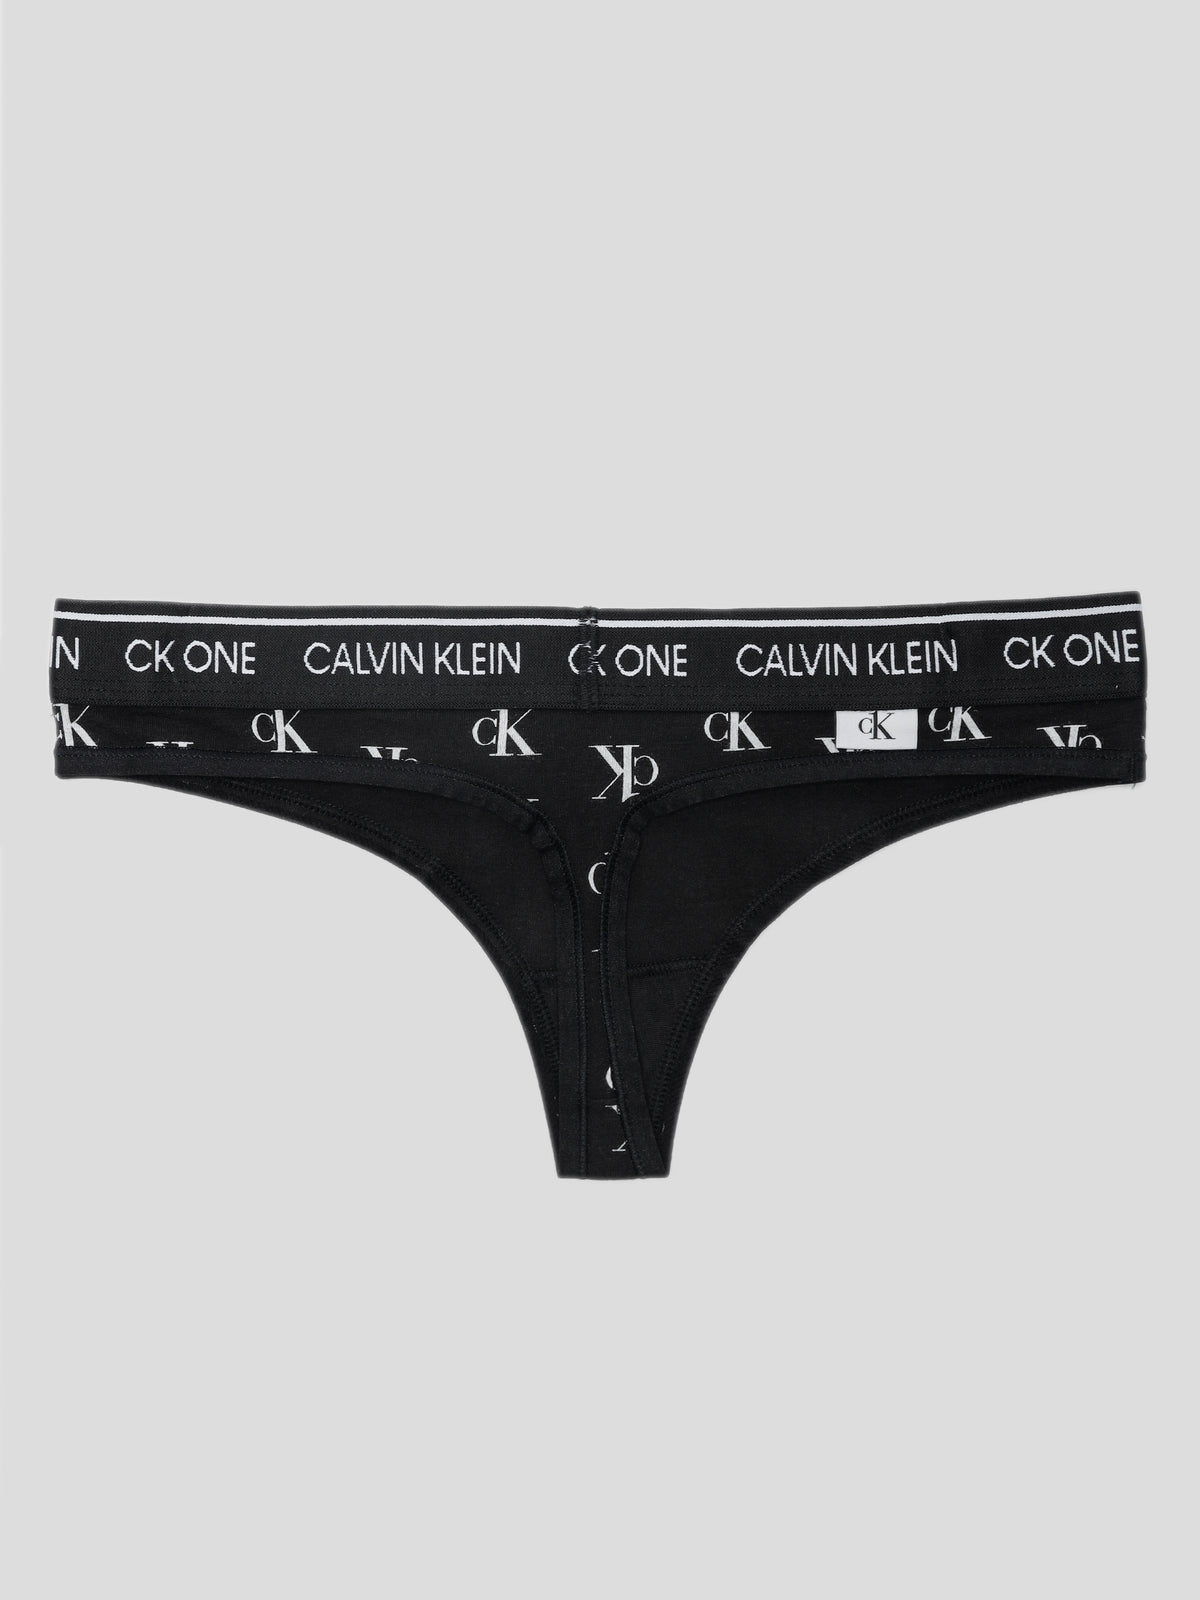 Staggered CK Logo Thong in Black